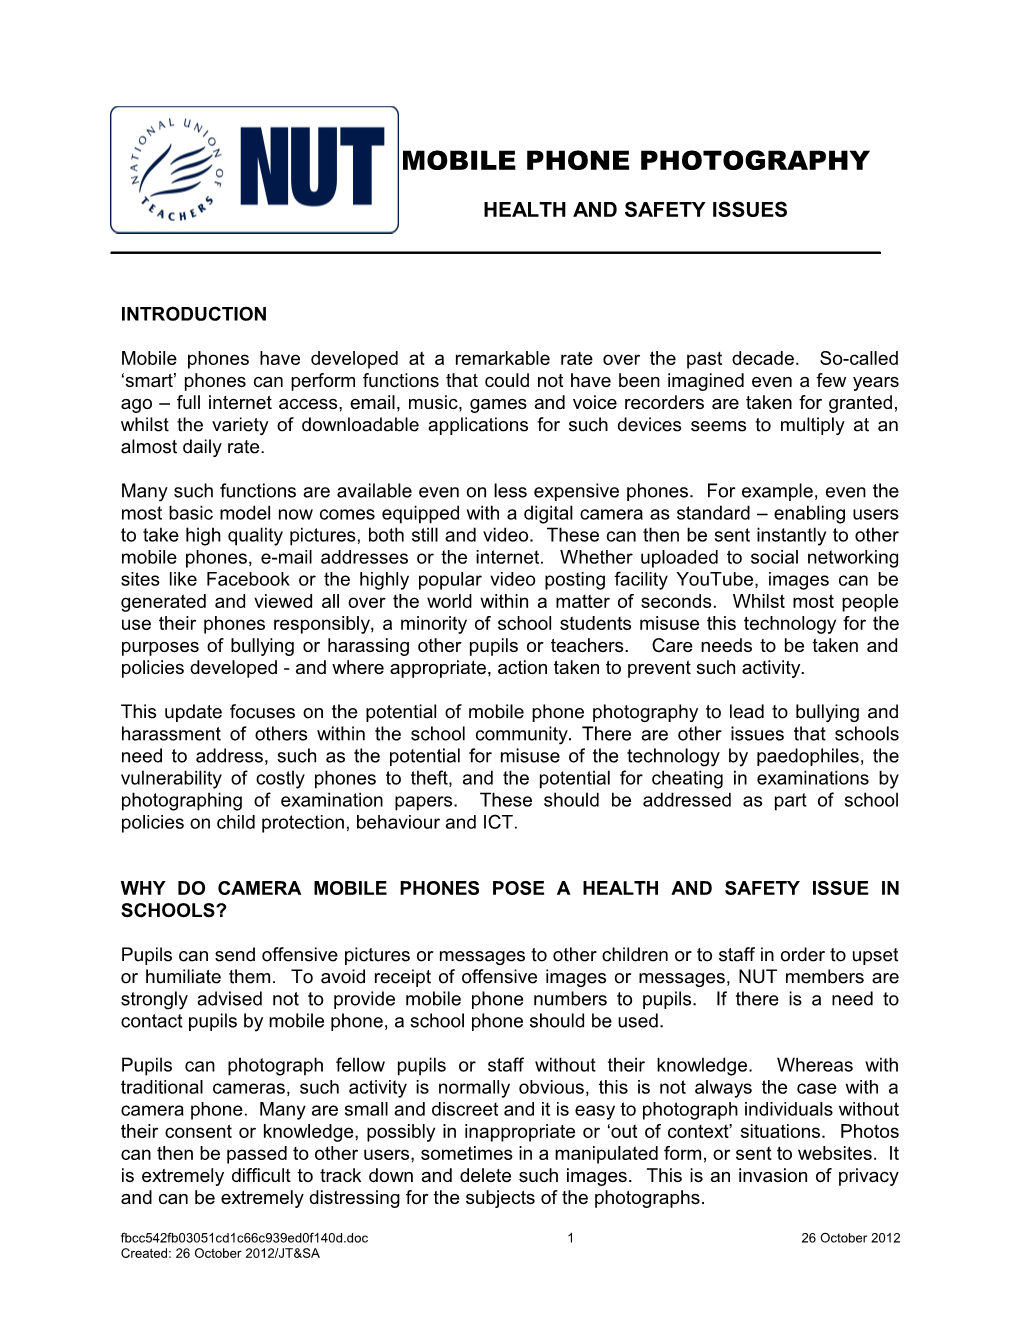 Camera Mobile Phones Health and Safety Issues